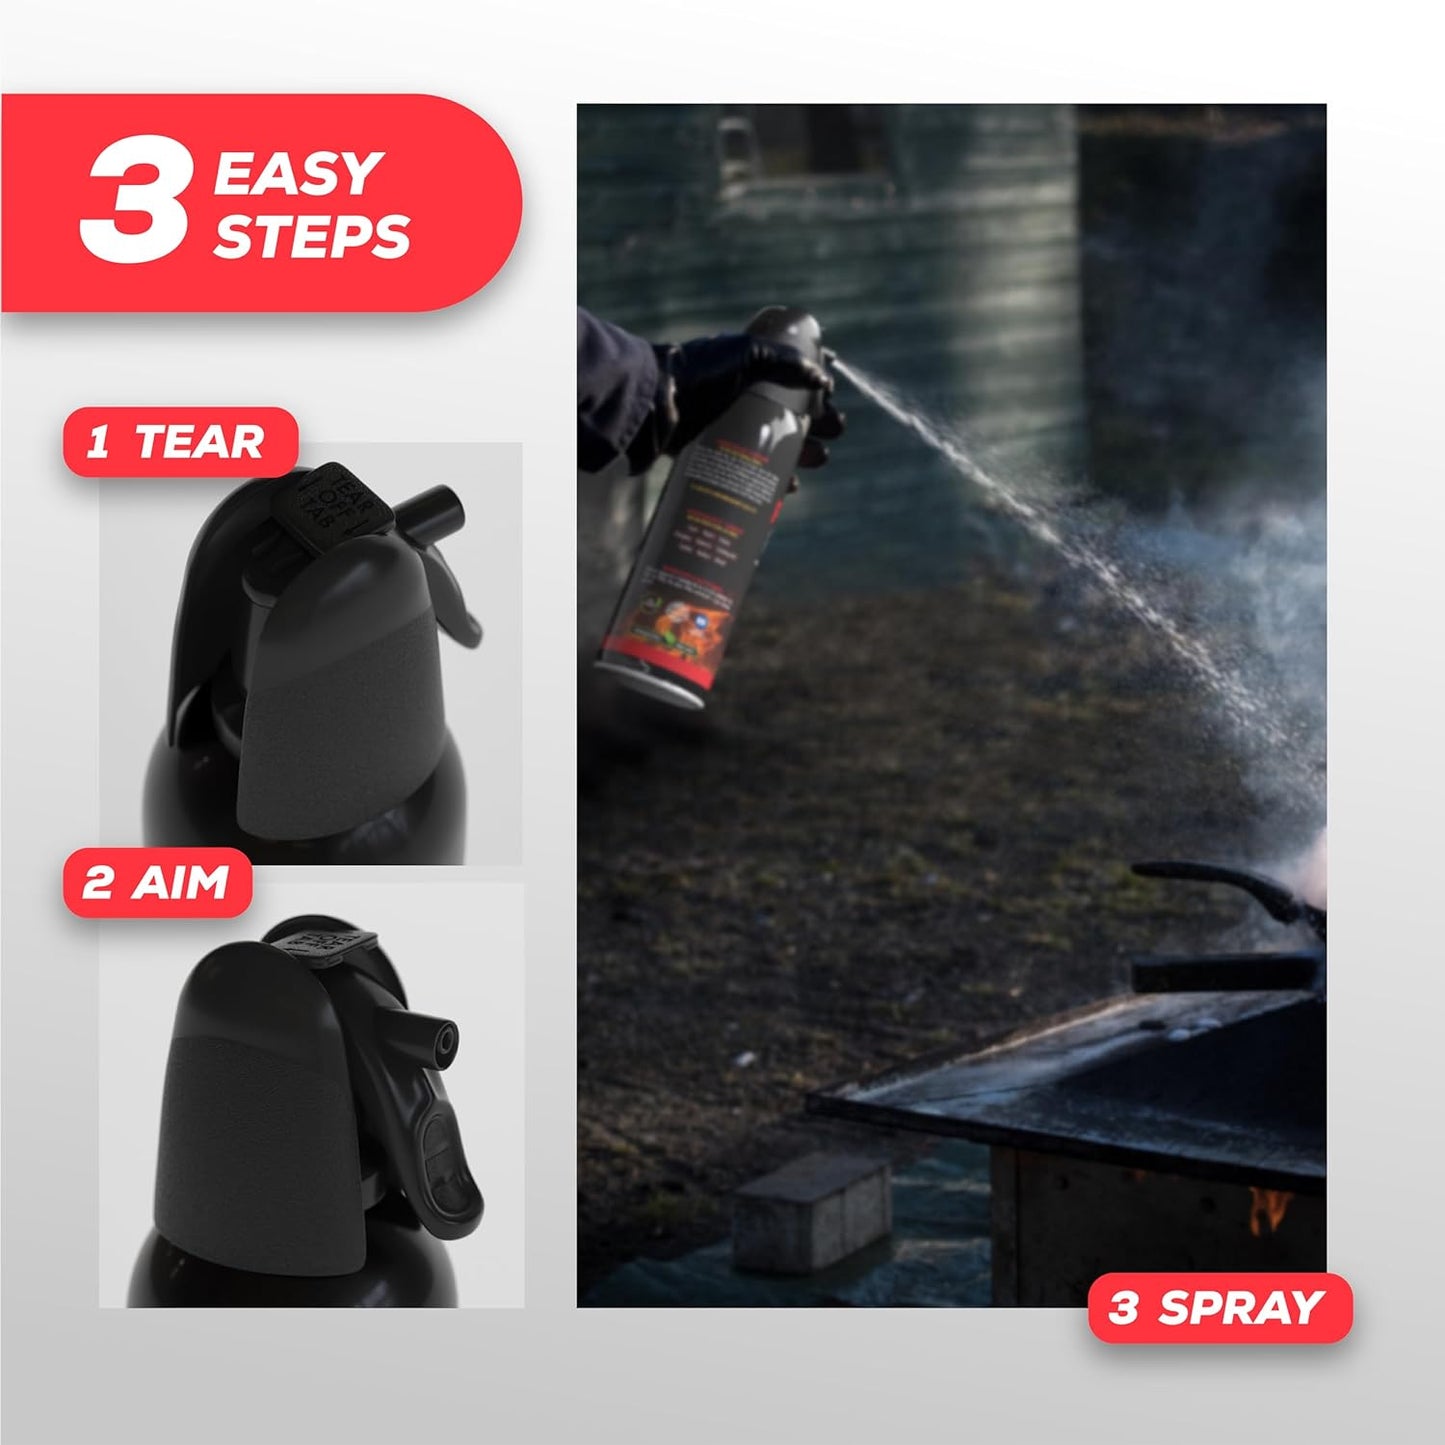 Step-by-step guide on using Fire Fix fire extinguisher foam, highlighting its easy three-step process: tear, aim, and spray.